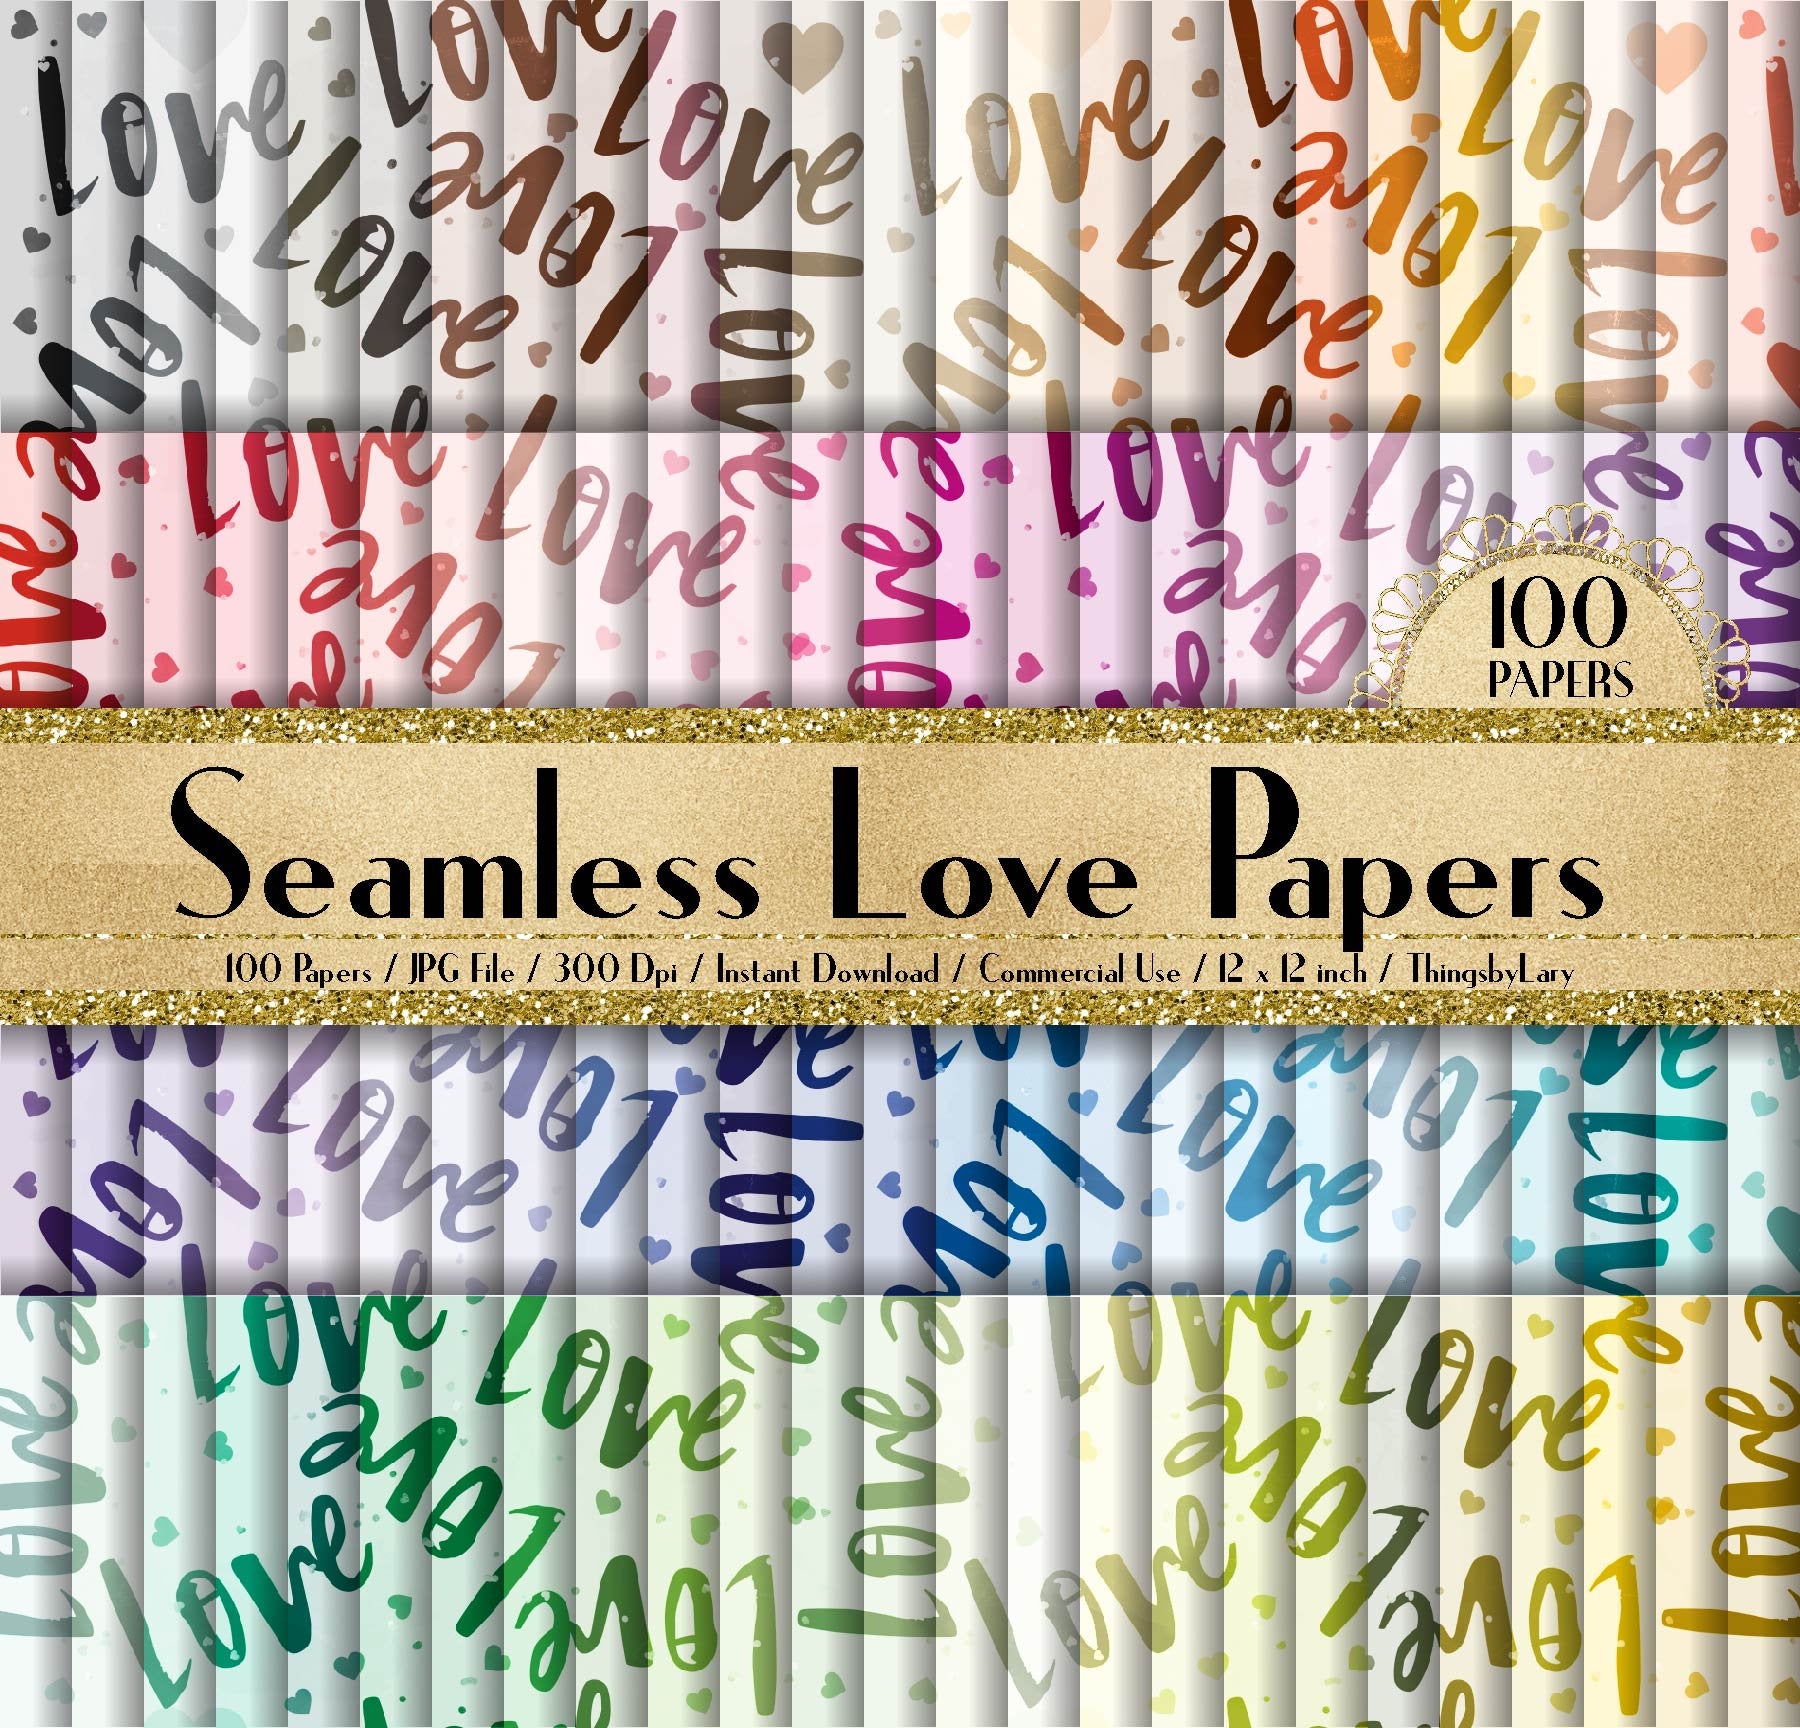 100 Seamless Vintage Love Papers 12 inch 300 Dpi Commercial Use Instant Download, Seamless Love Papers,Seamless Vintage Papers